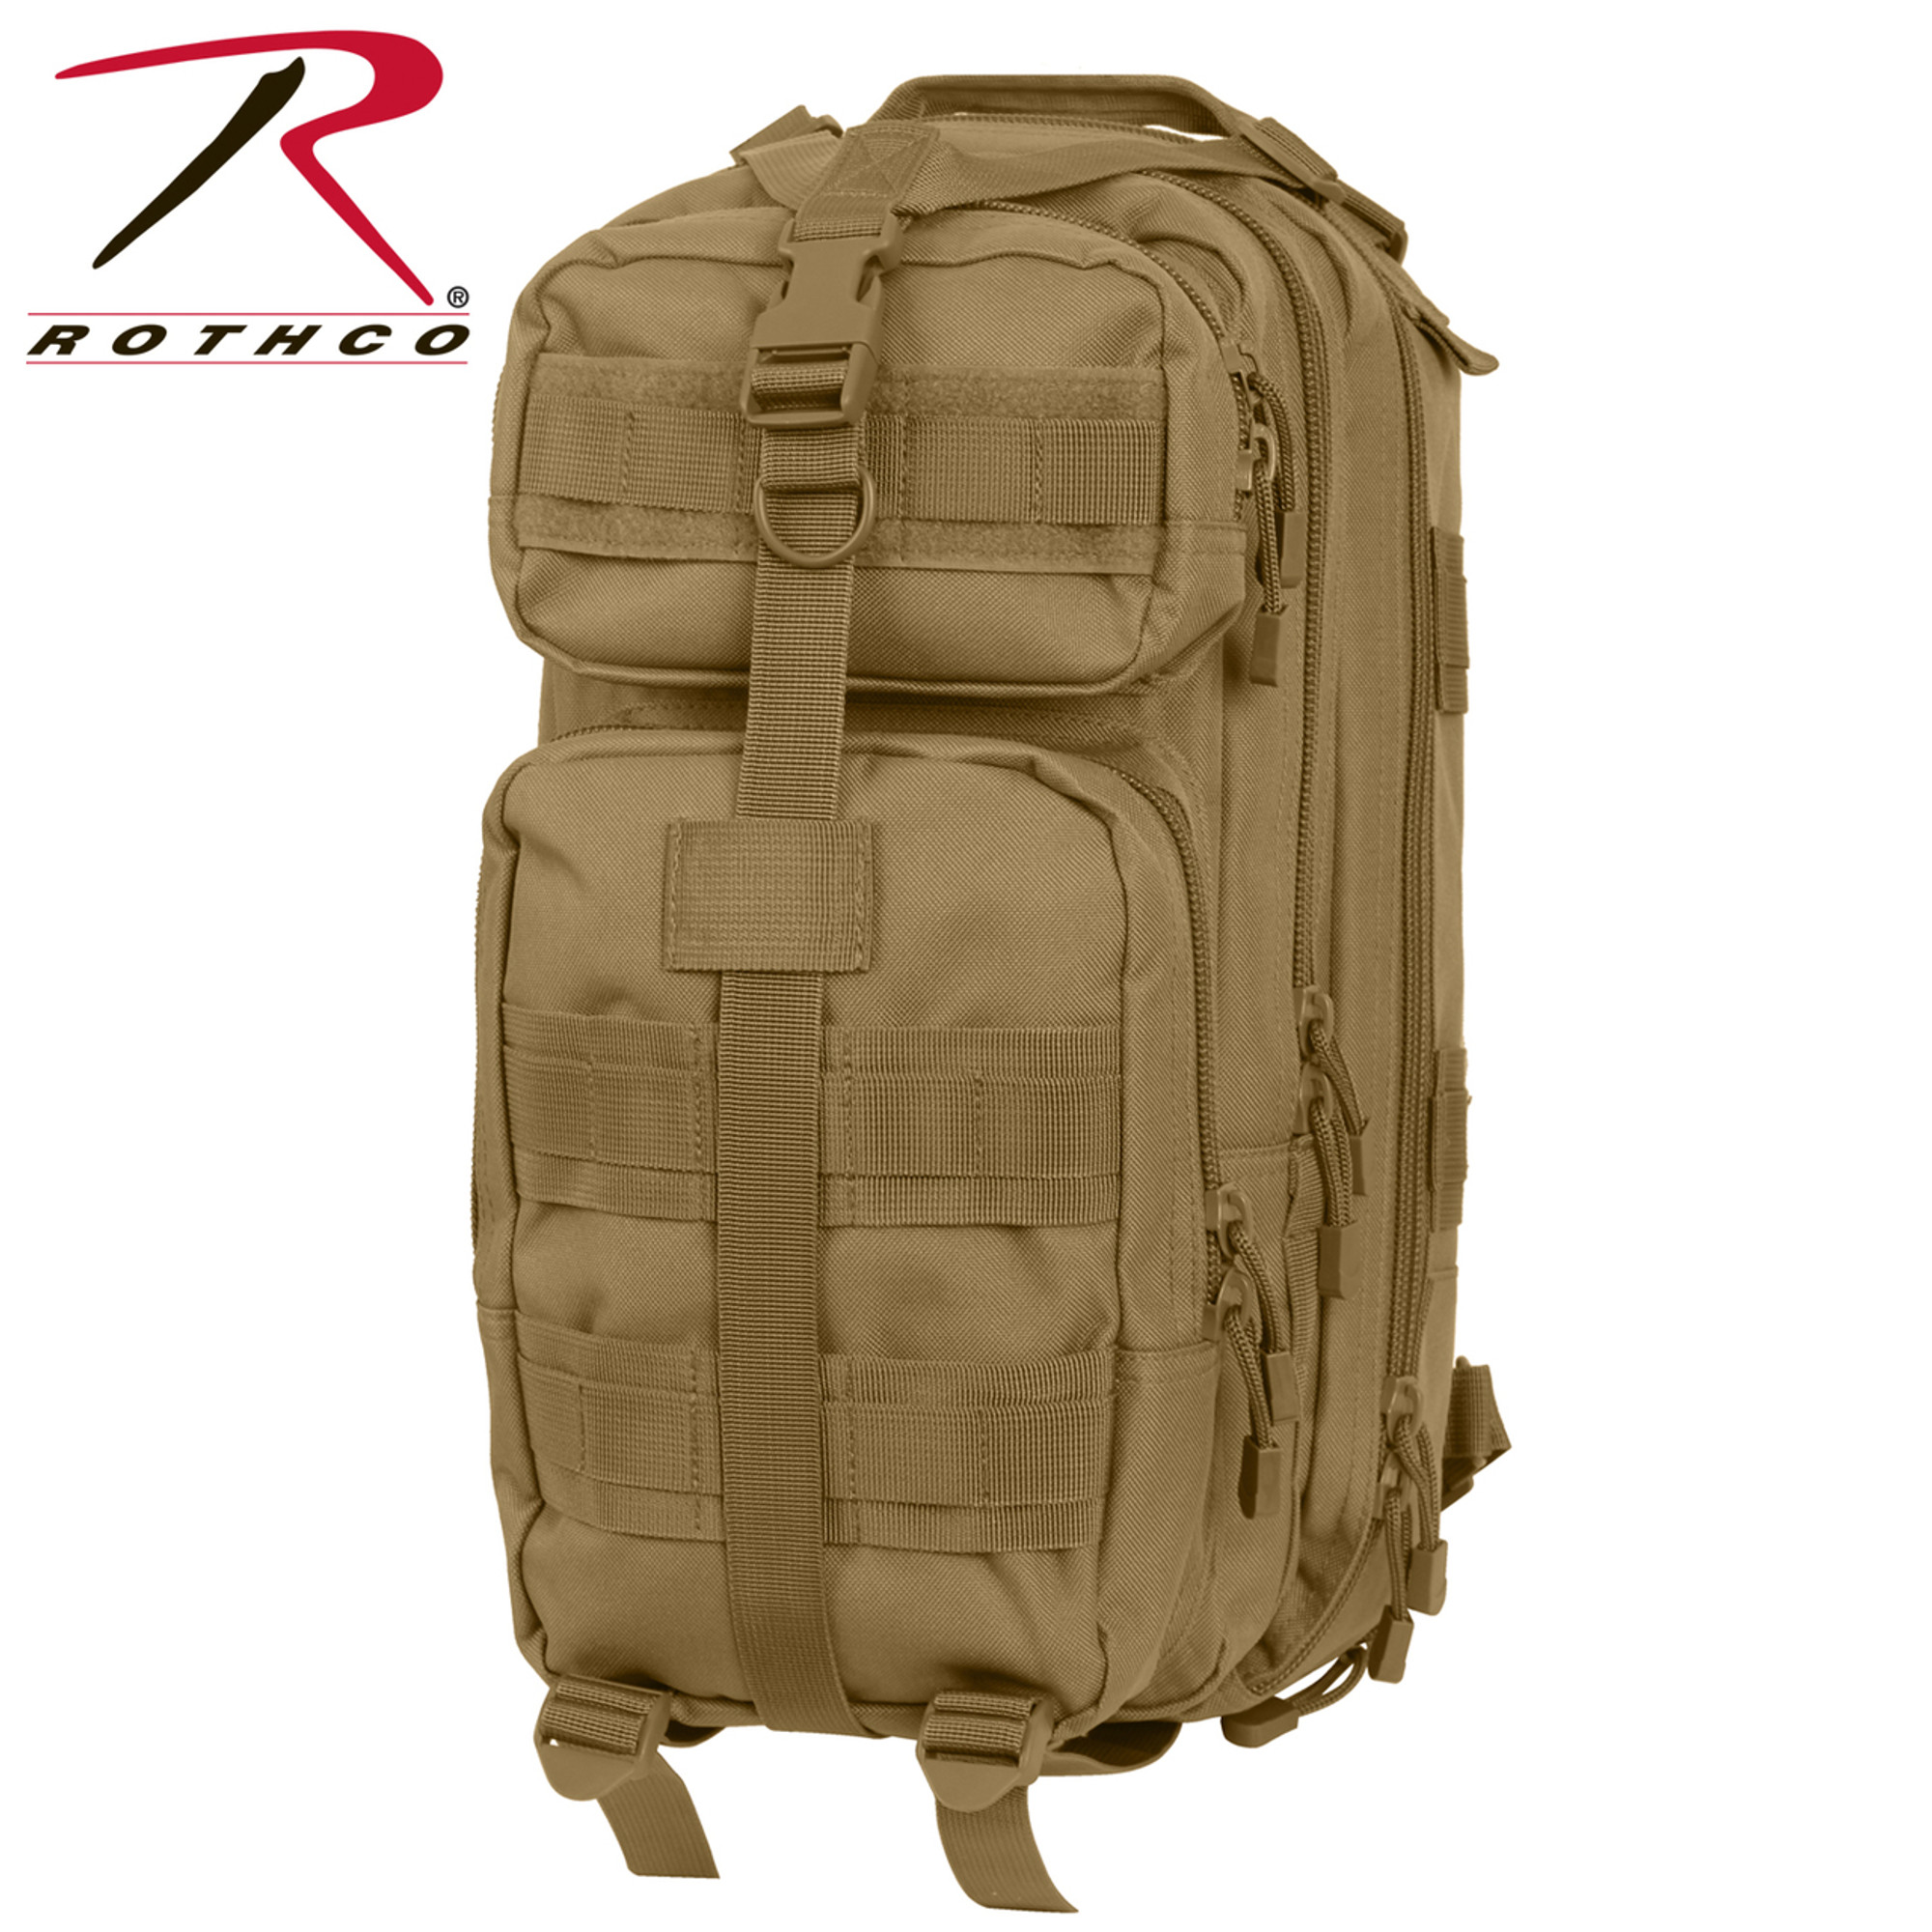 Rothco Convertible Medium Transport Pack - Coyote Brown